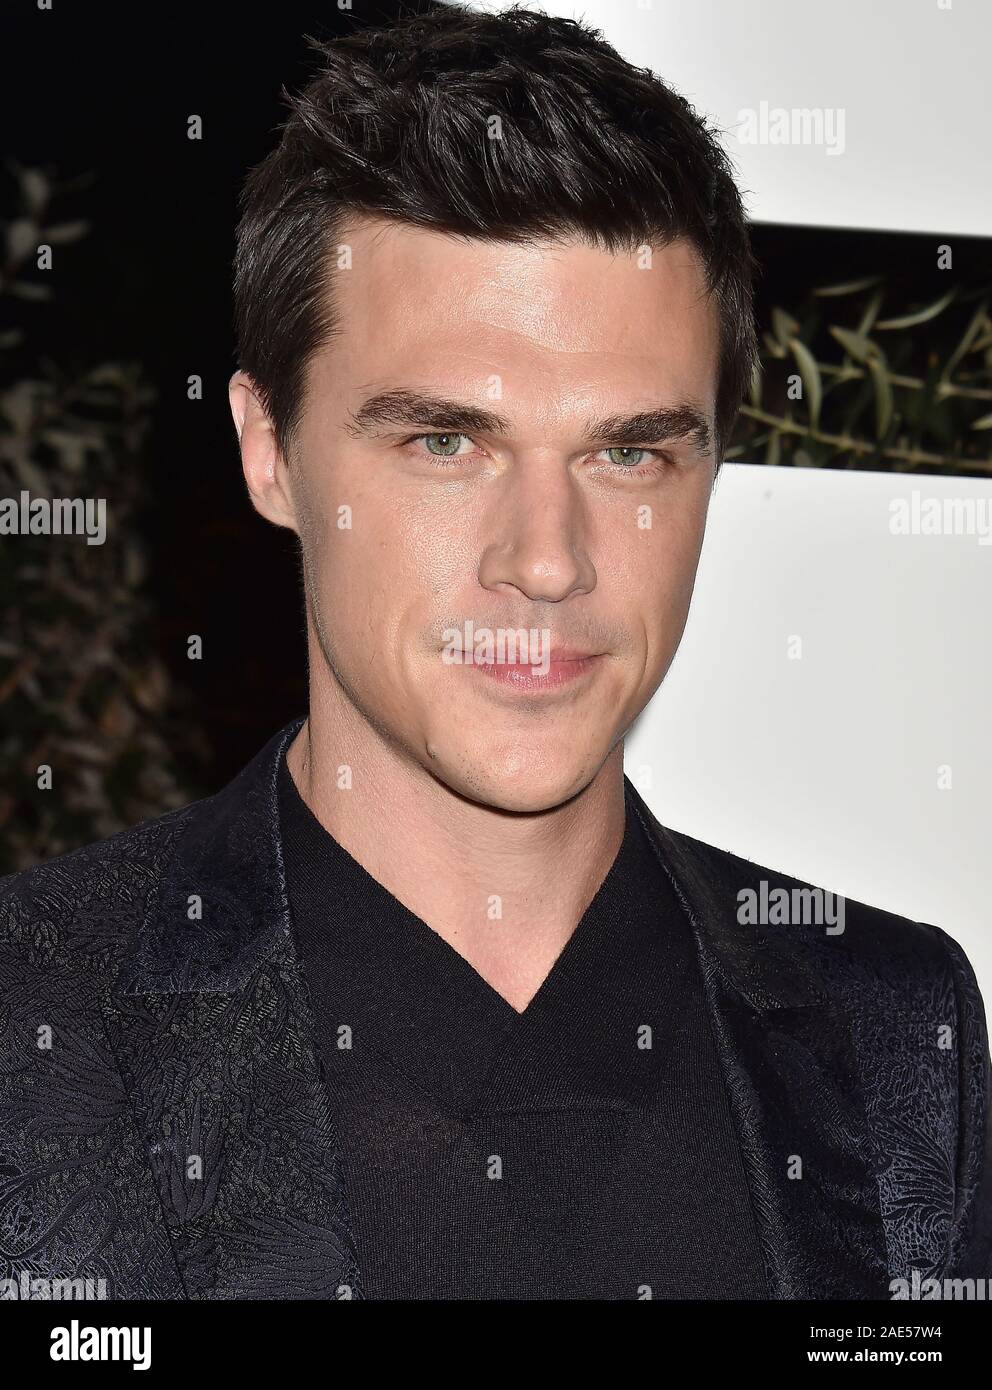 WEST HOLLYWOOD, CA - DECEMBER 05: Finn Wittrock attends the 2019 GQ Men Of The Year Celebration At The West Hollywood EDITION on December 05, 2019 in West Hollywood, California. Stock Photo